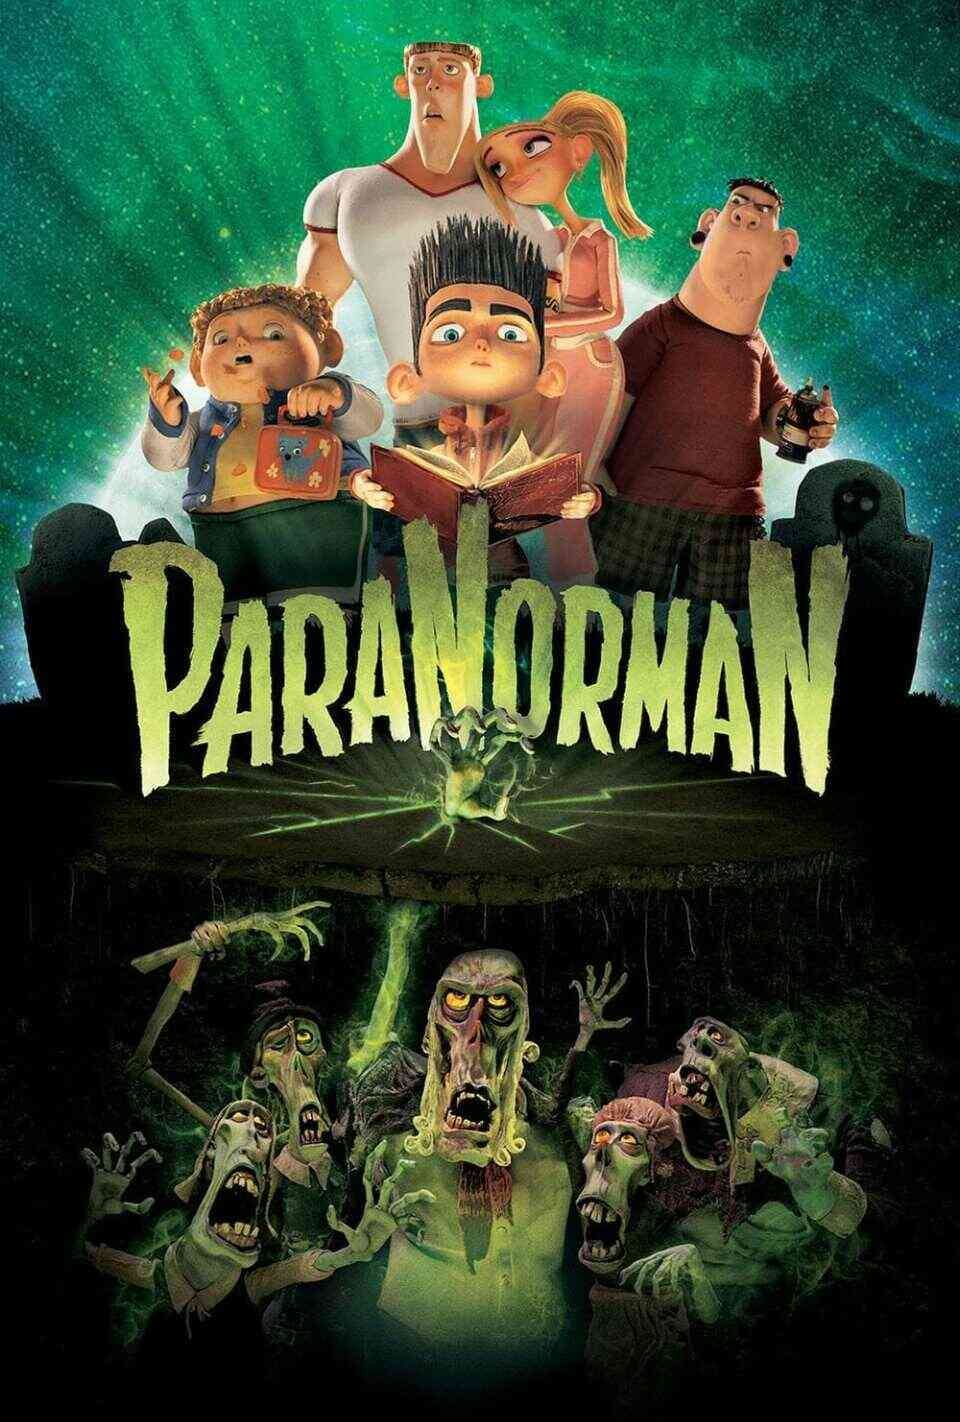 Read ParaNorman screenplay (poster)